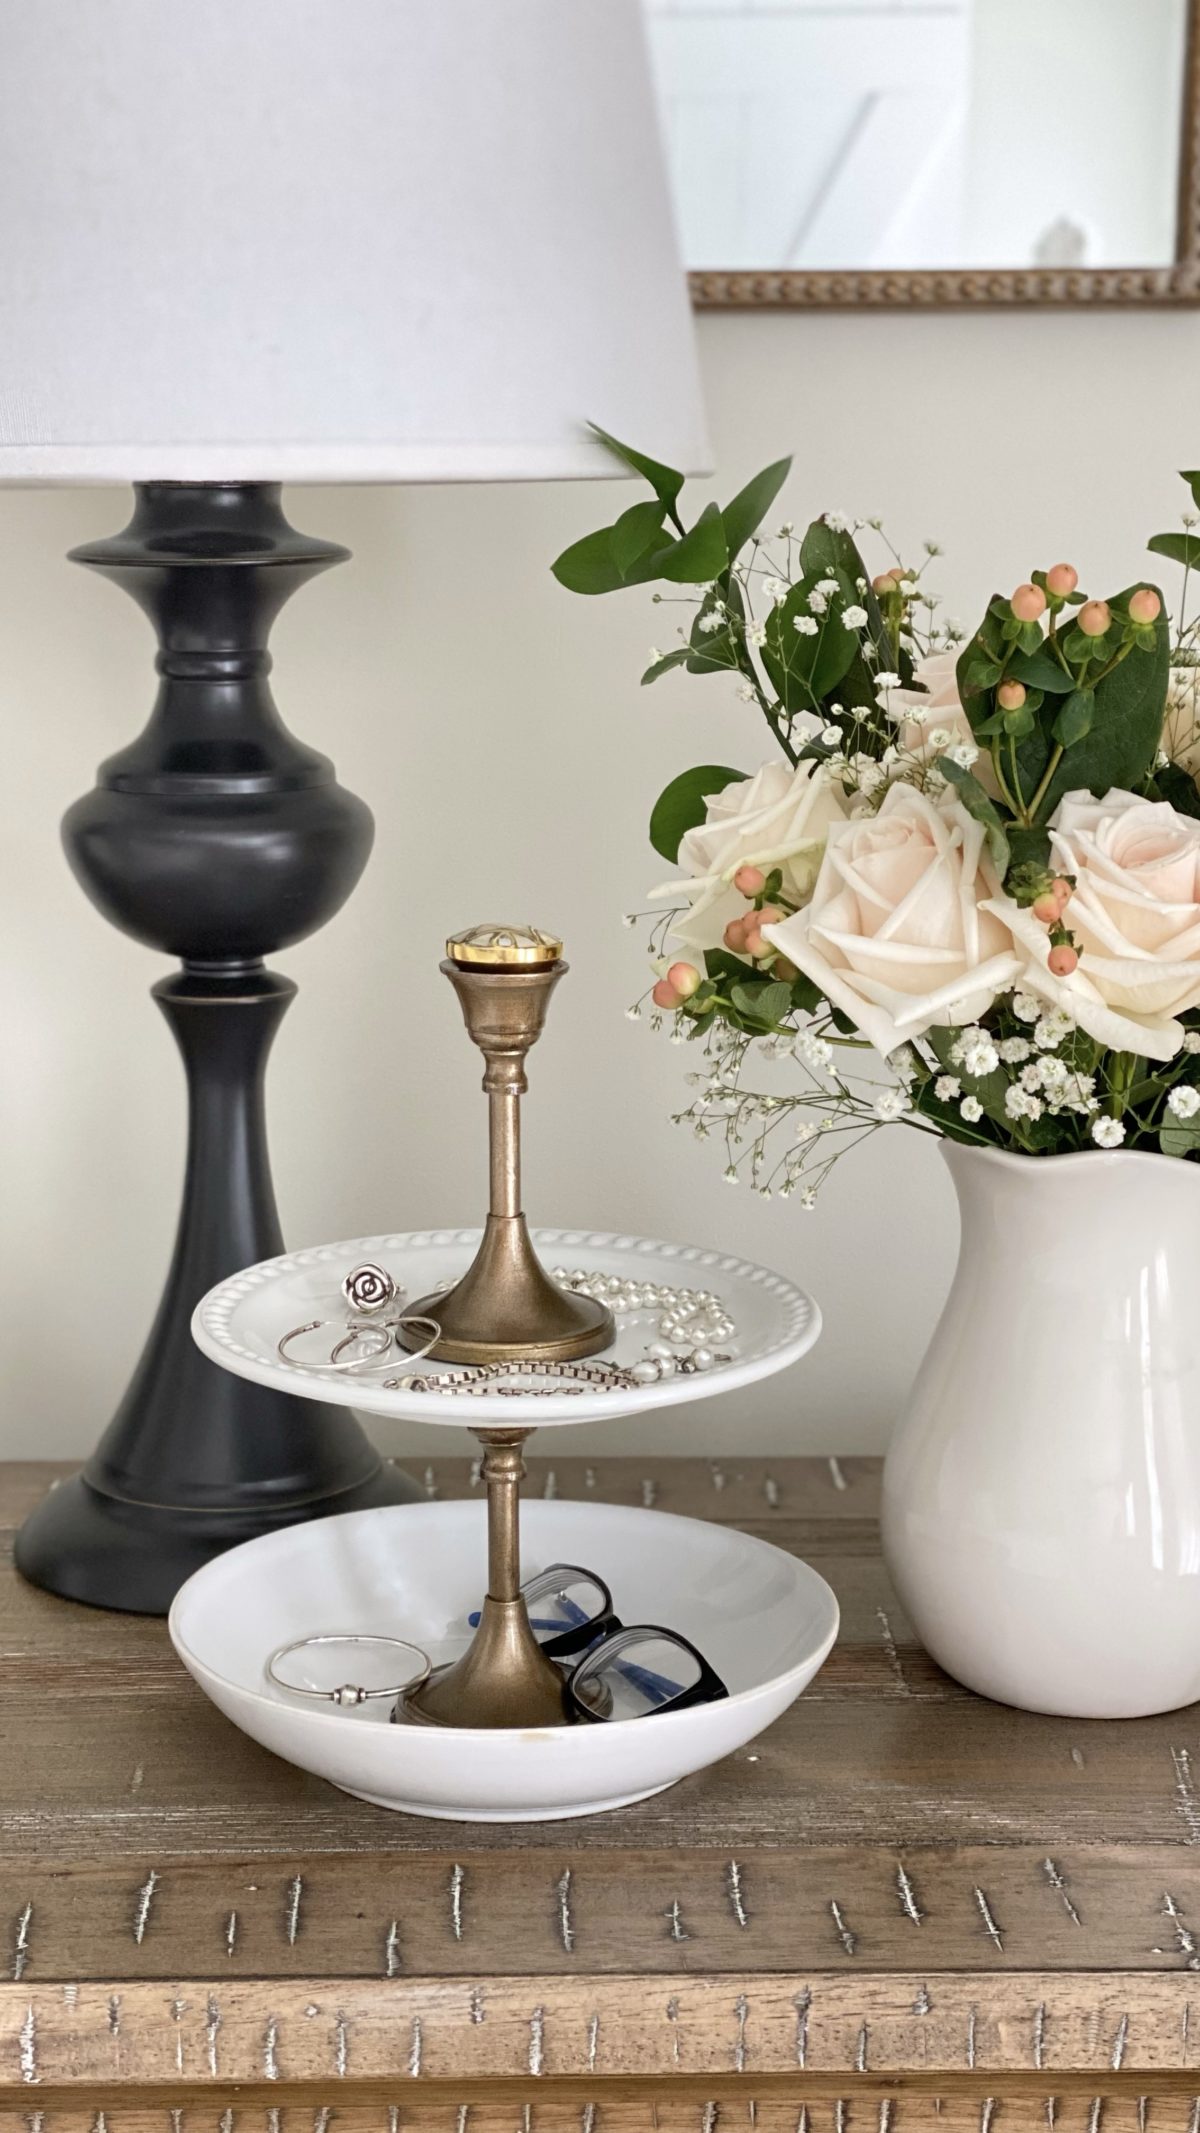 DIY tiered tray jewelry stand with a pitcher of roses and a lamp.